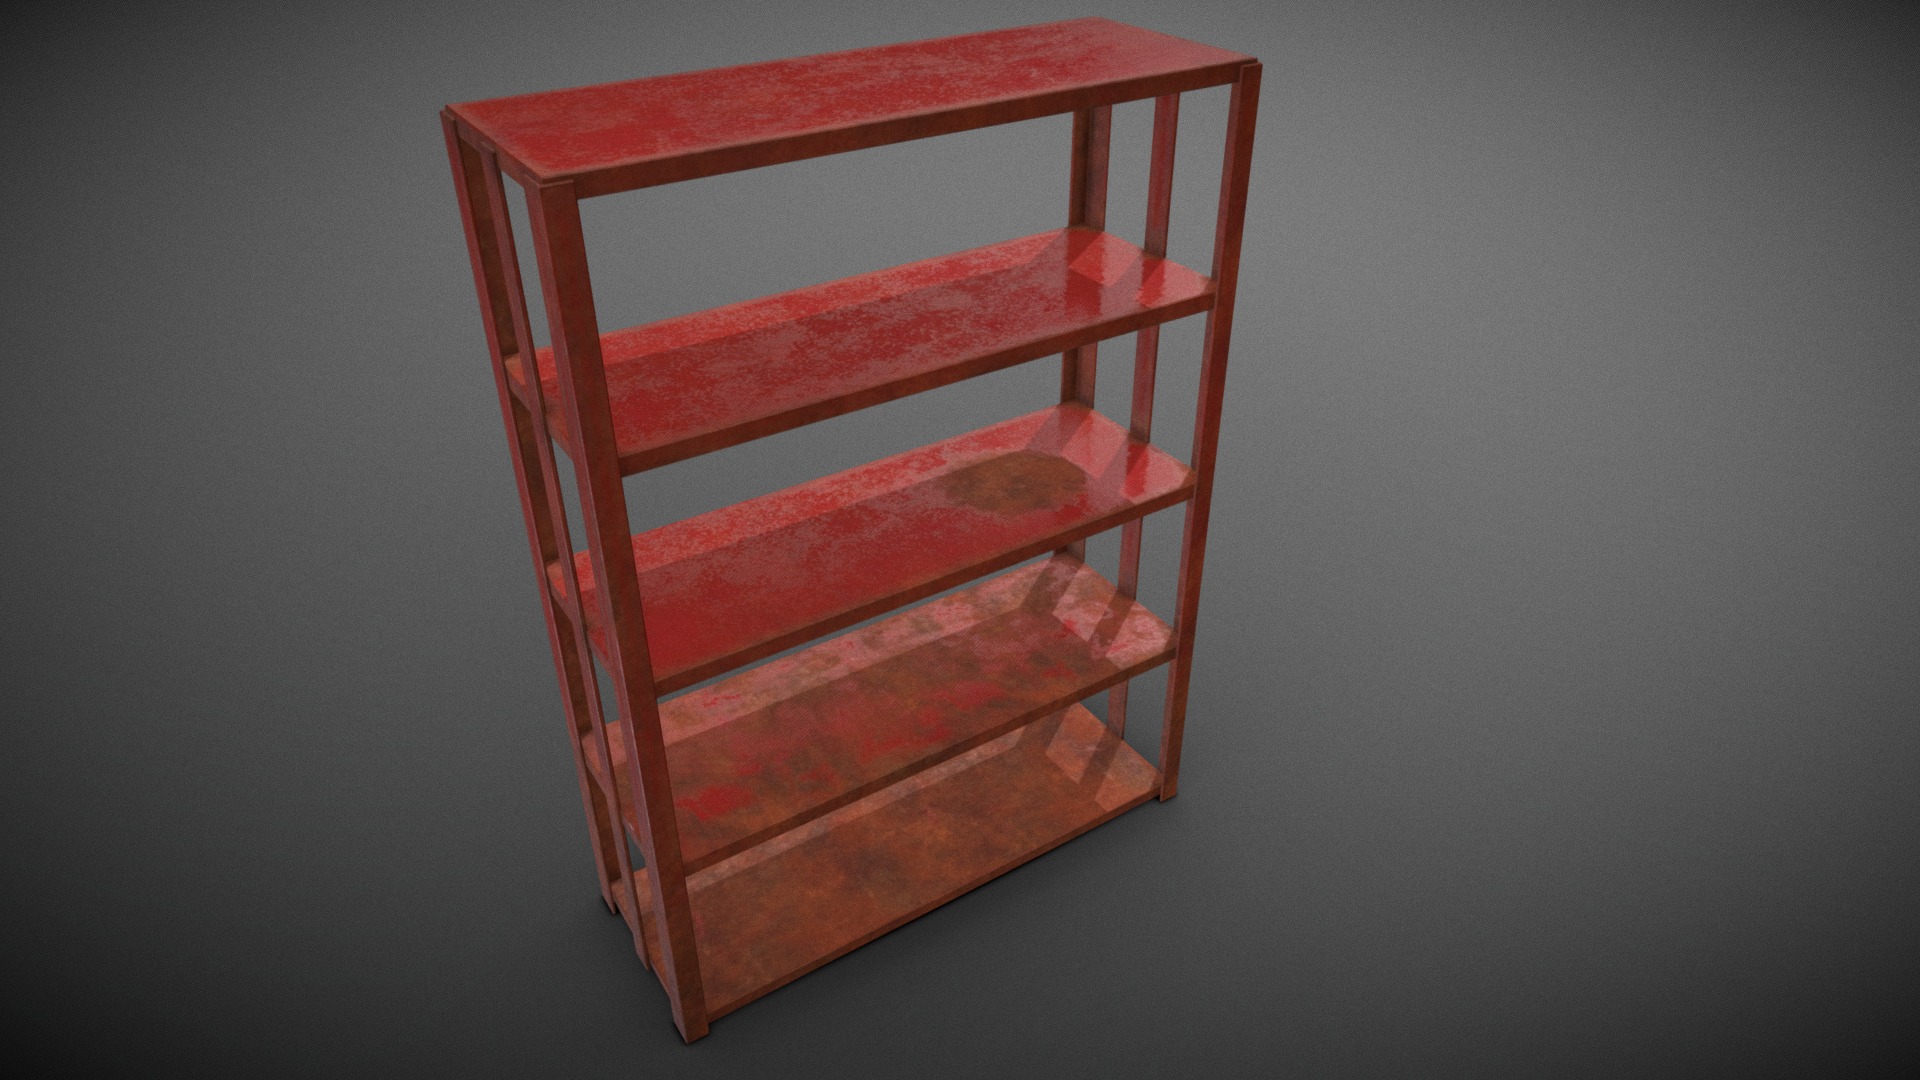 3D model Vintage Rusted Red Shelf - This is a 3D model of the Vintage Rusted Red Shelf. The 3D model is about a wooden chair with a cushion.